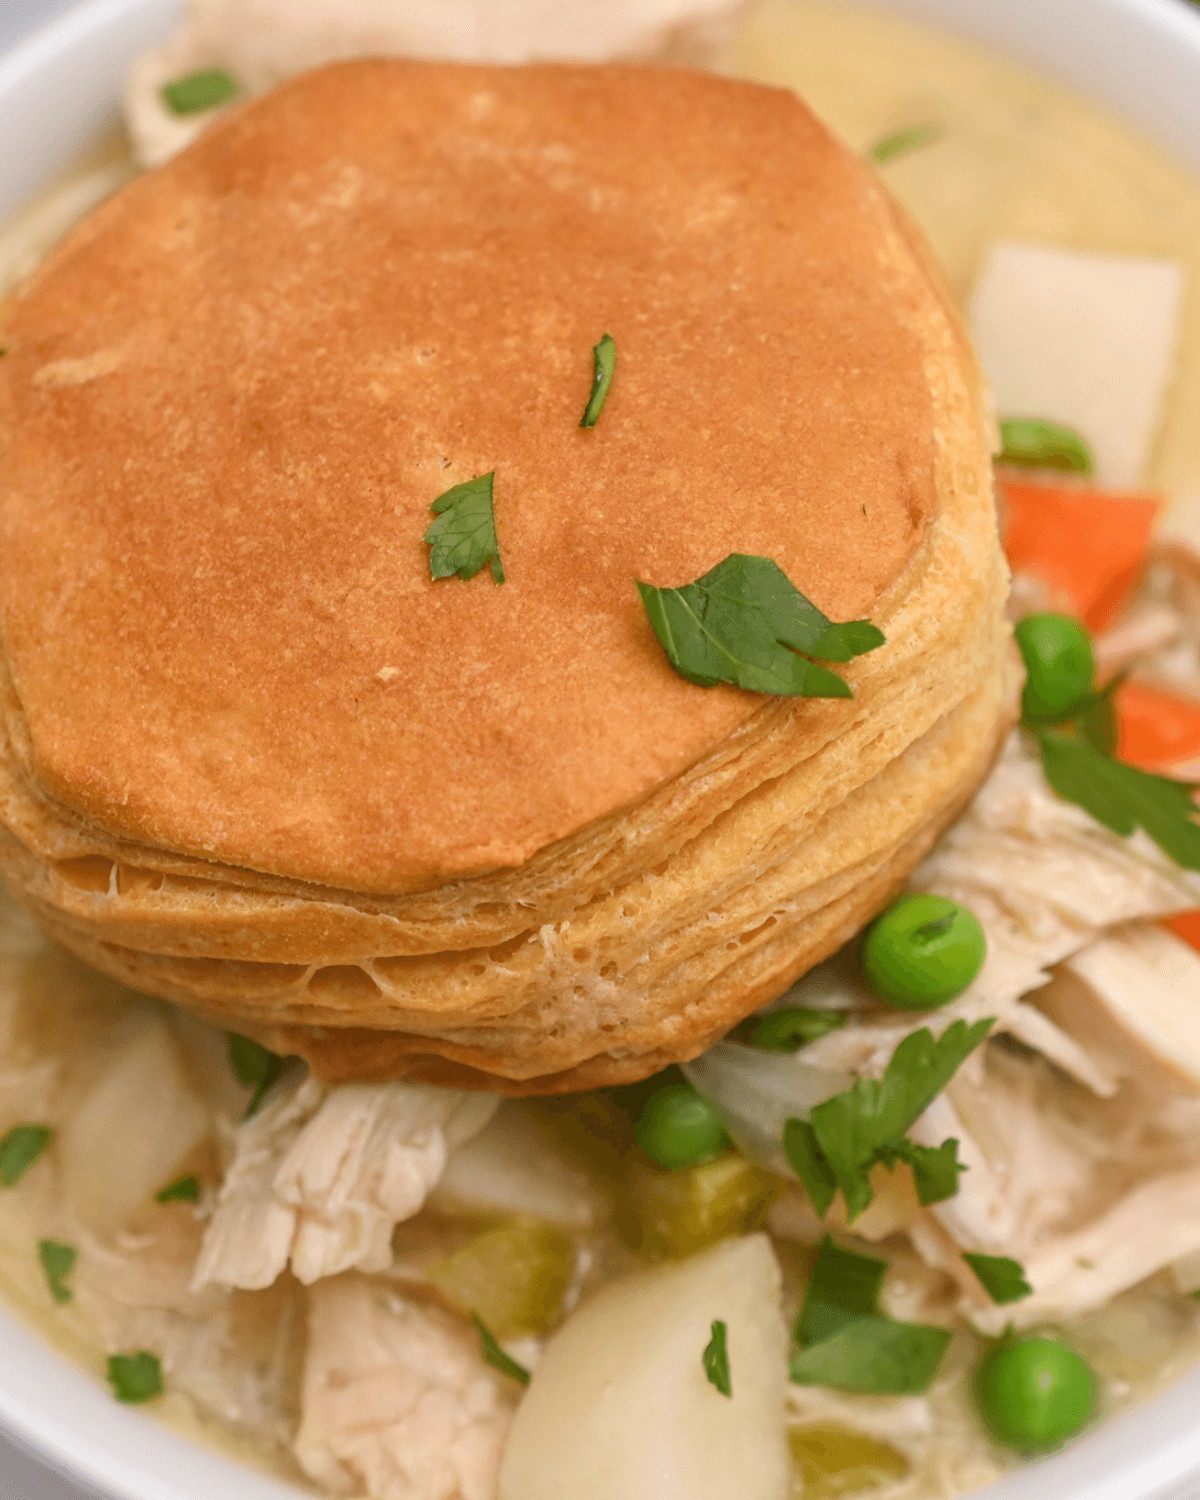 A plate of food with a biscuit and vegetables, including a crockpot chicken pot pie.